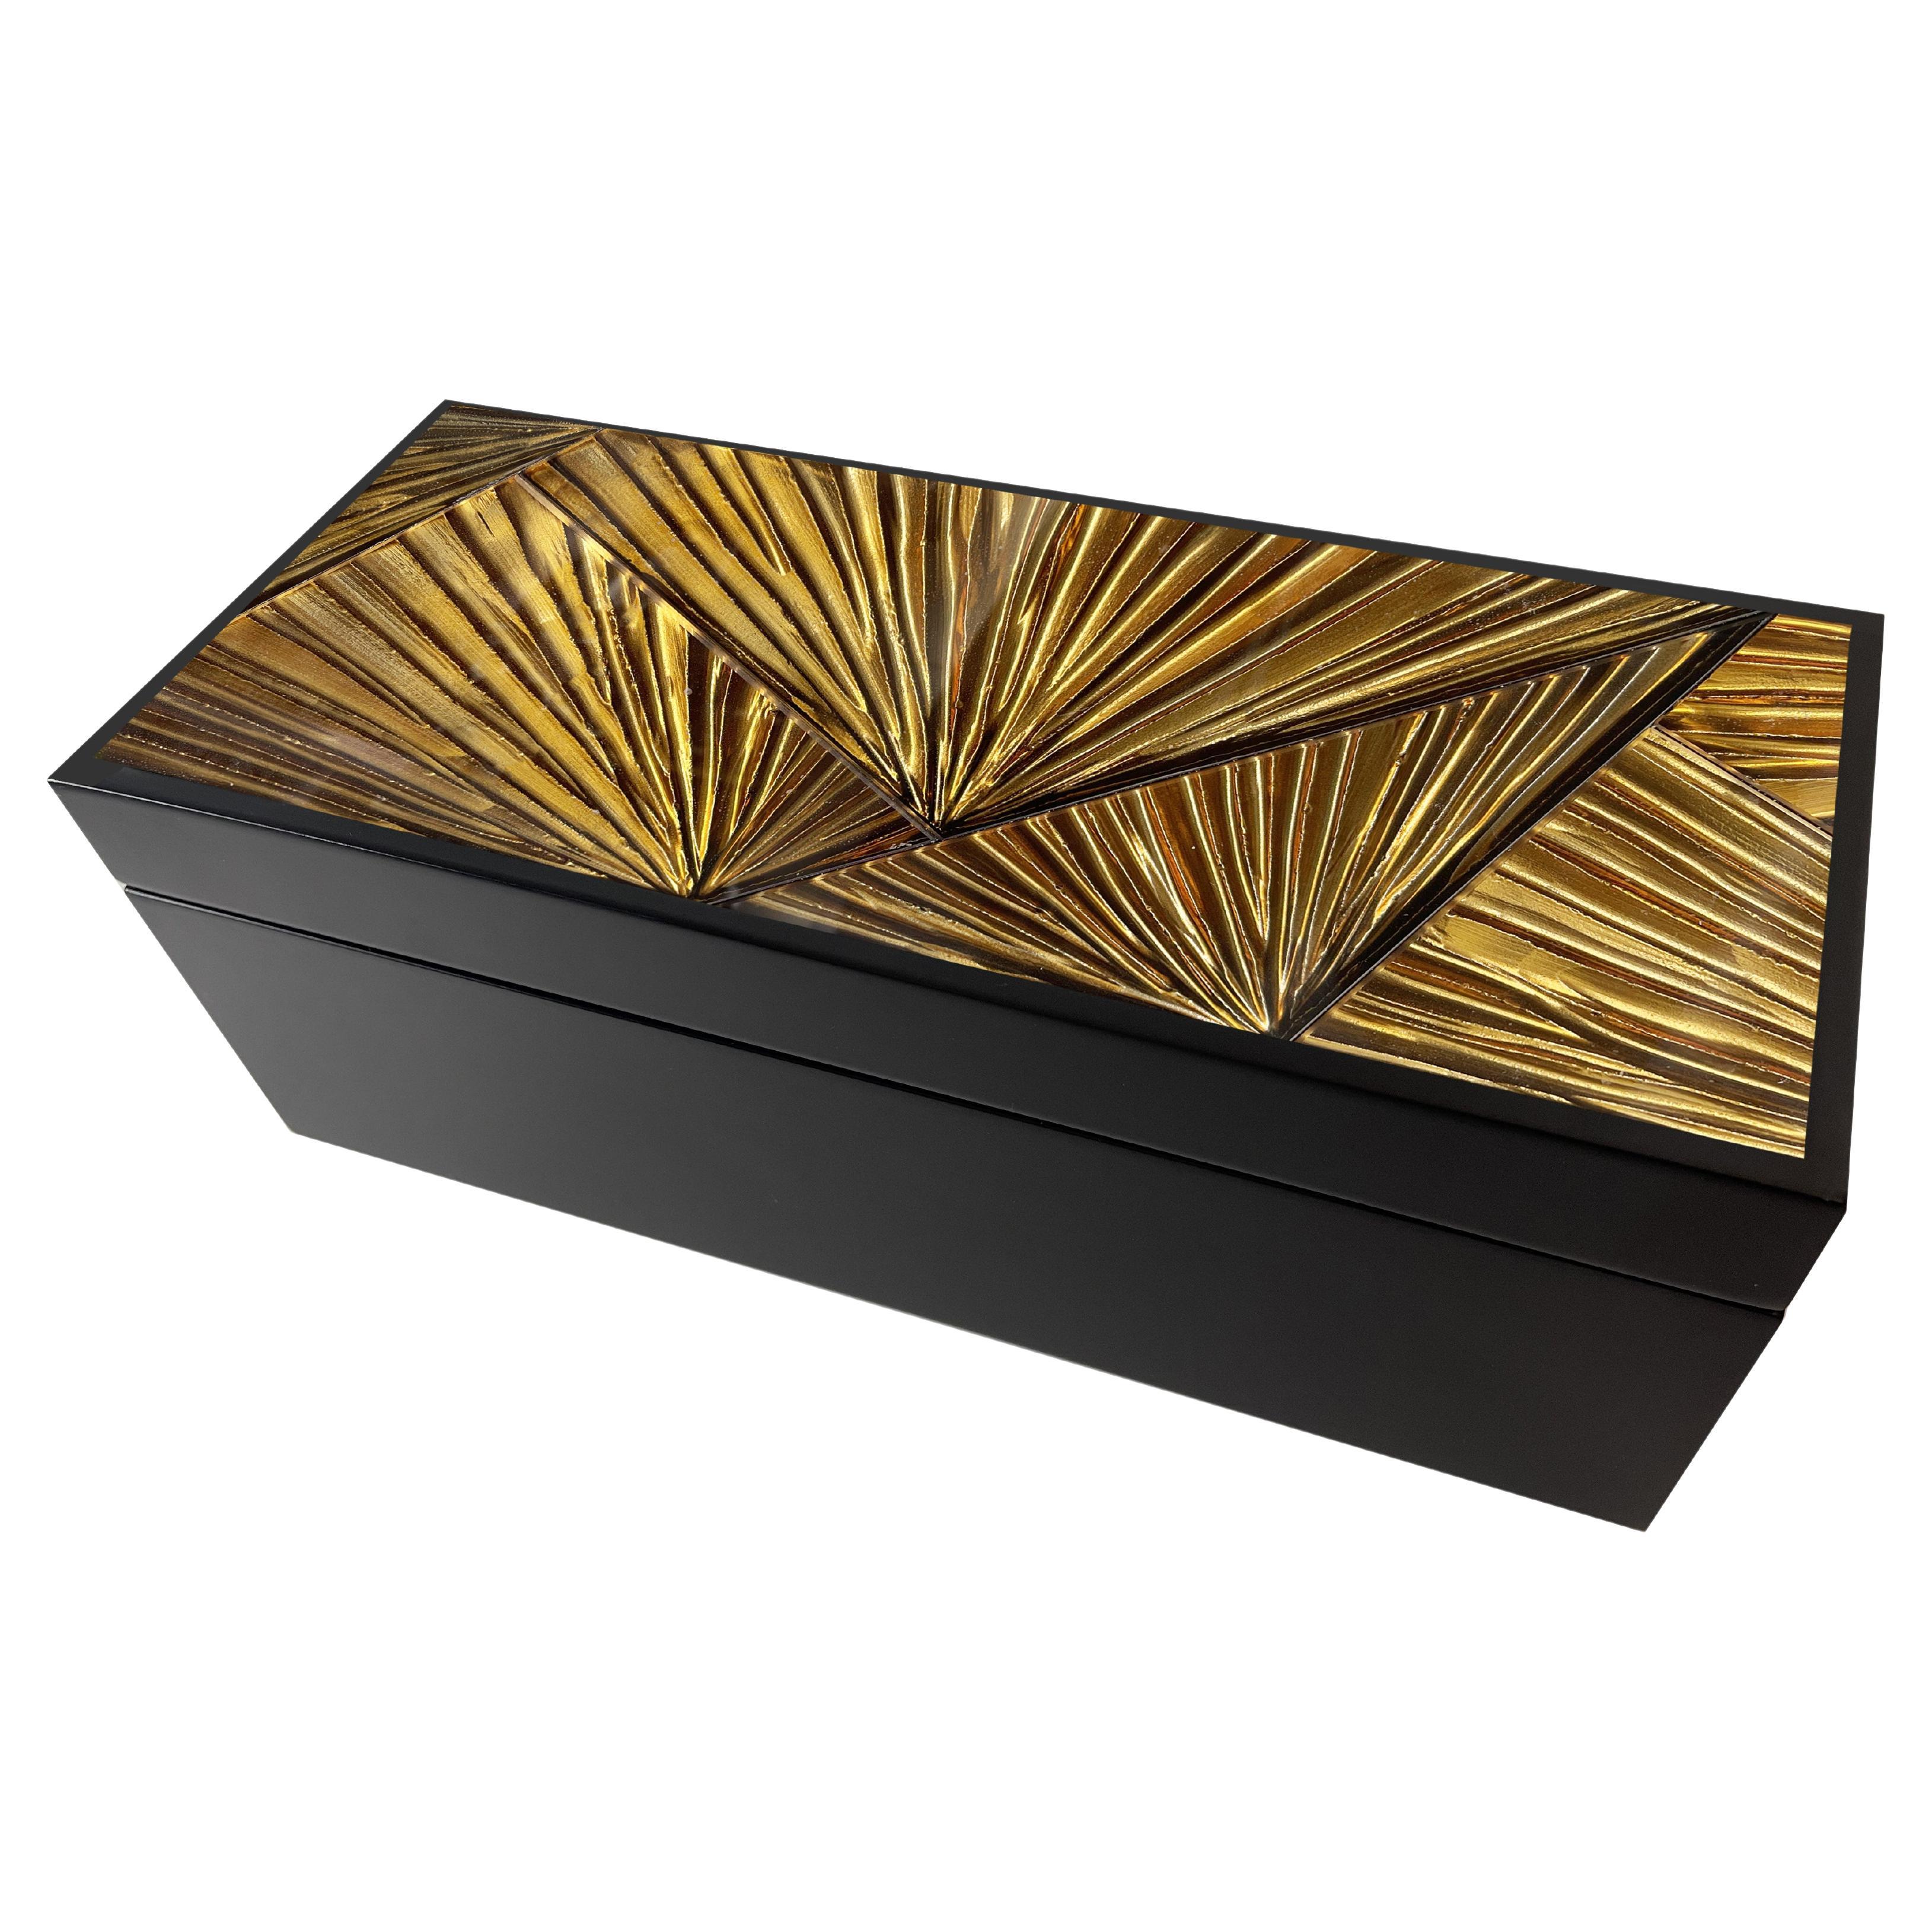 Contemporary Jewelry Box Handmade Black Wood and Engraved Glass by Ghirò Studio